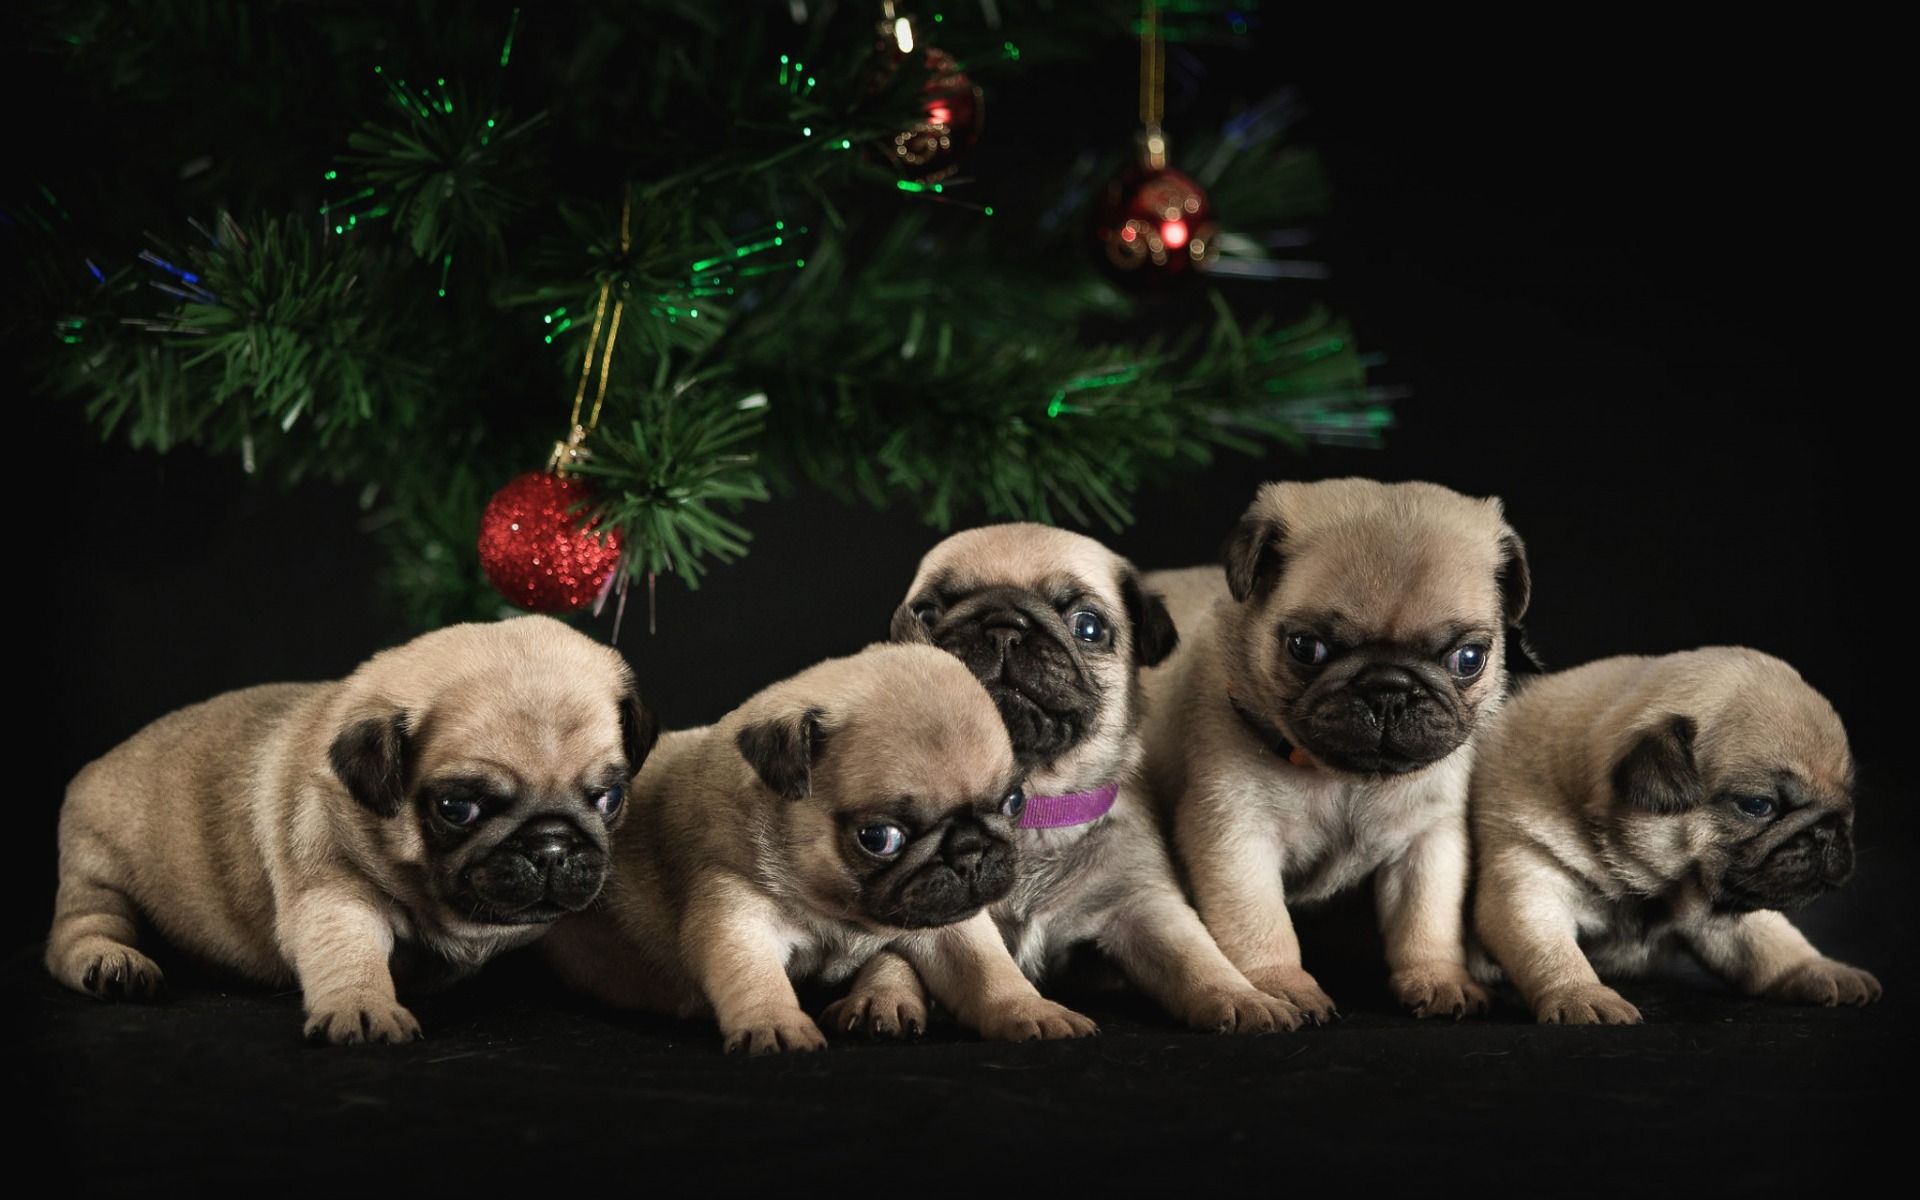 Download wallpaper pugs, little puppies, family, New Year, Christmas, tree, small dogs, pets, cute puppies, pug, dogs for desktop with resolution 1920x1200. High Quality HD picture wallpaper